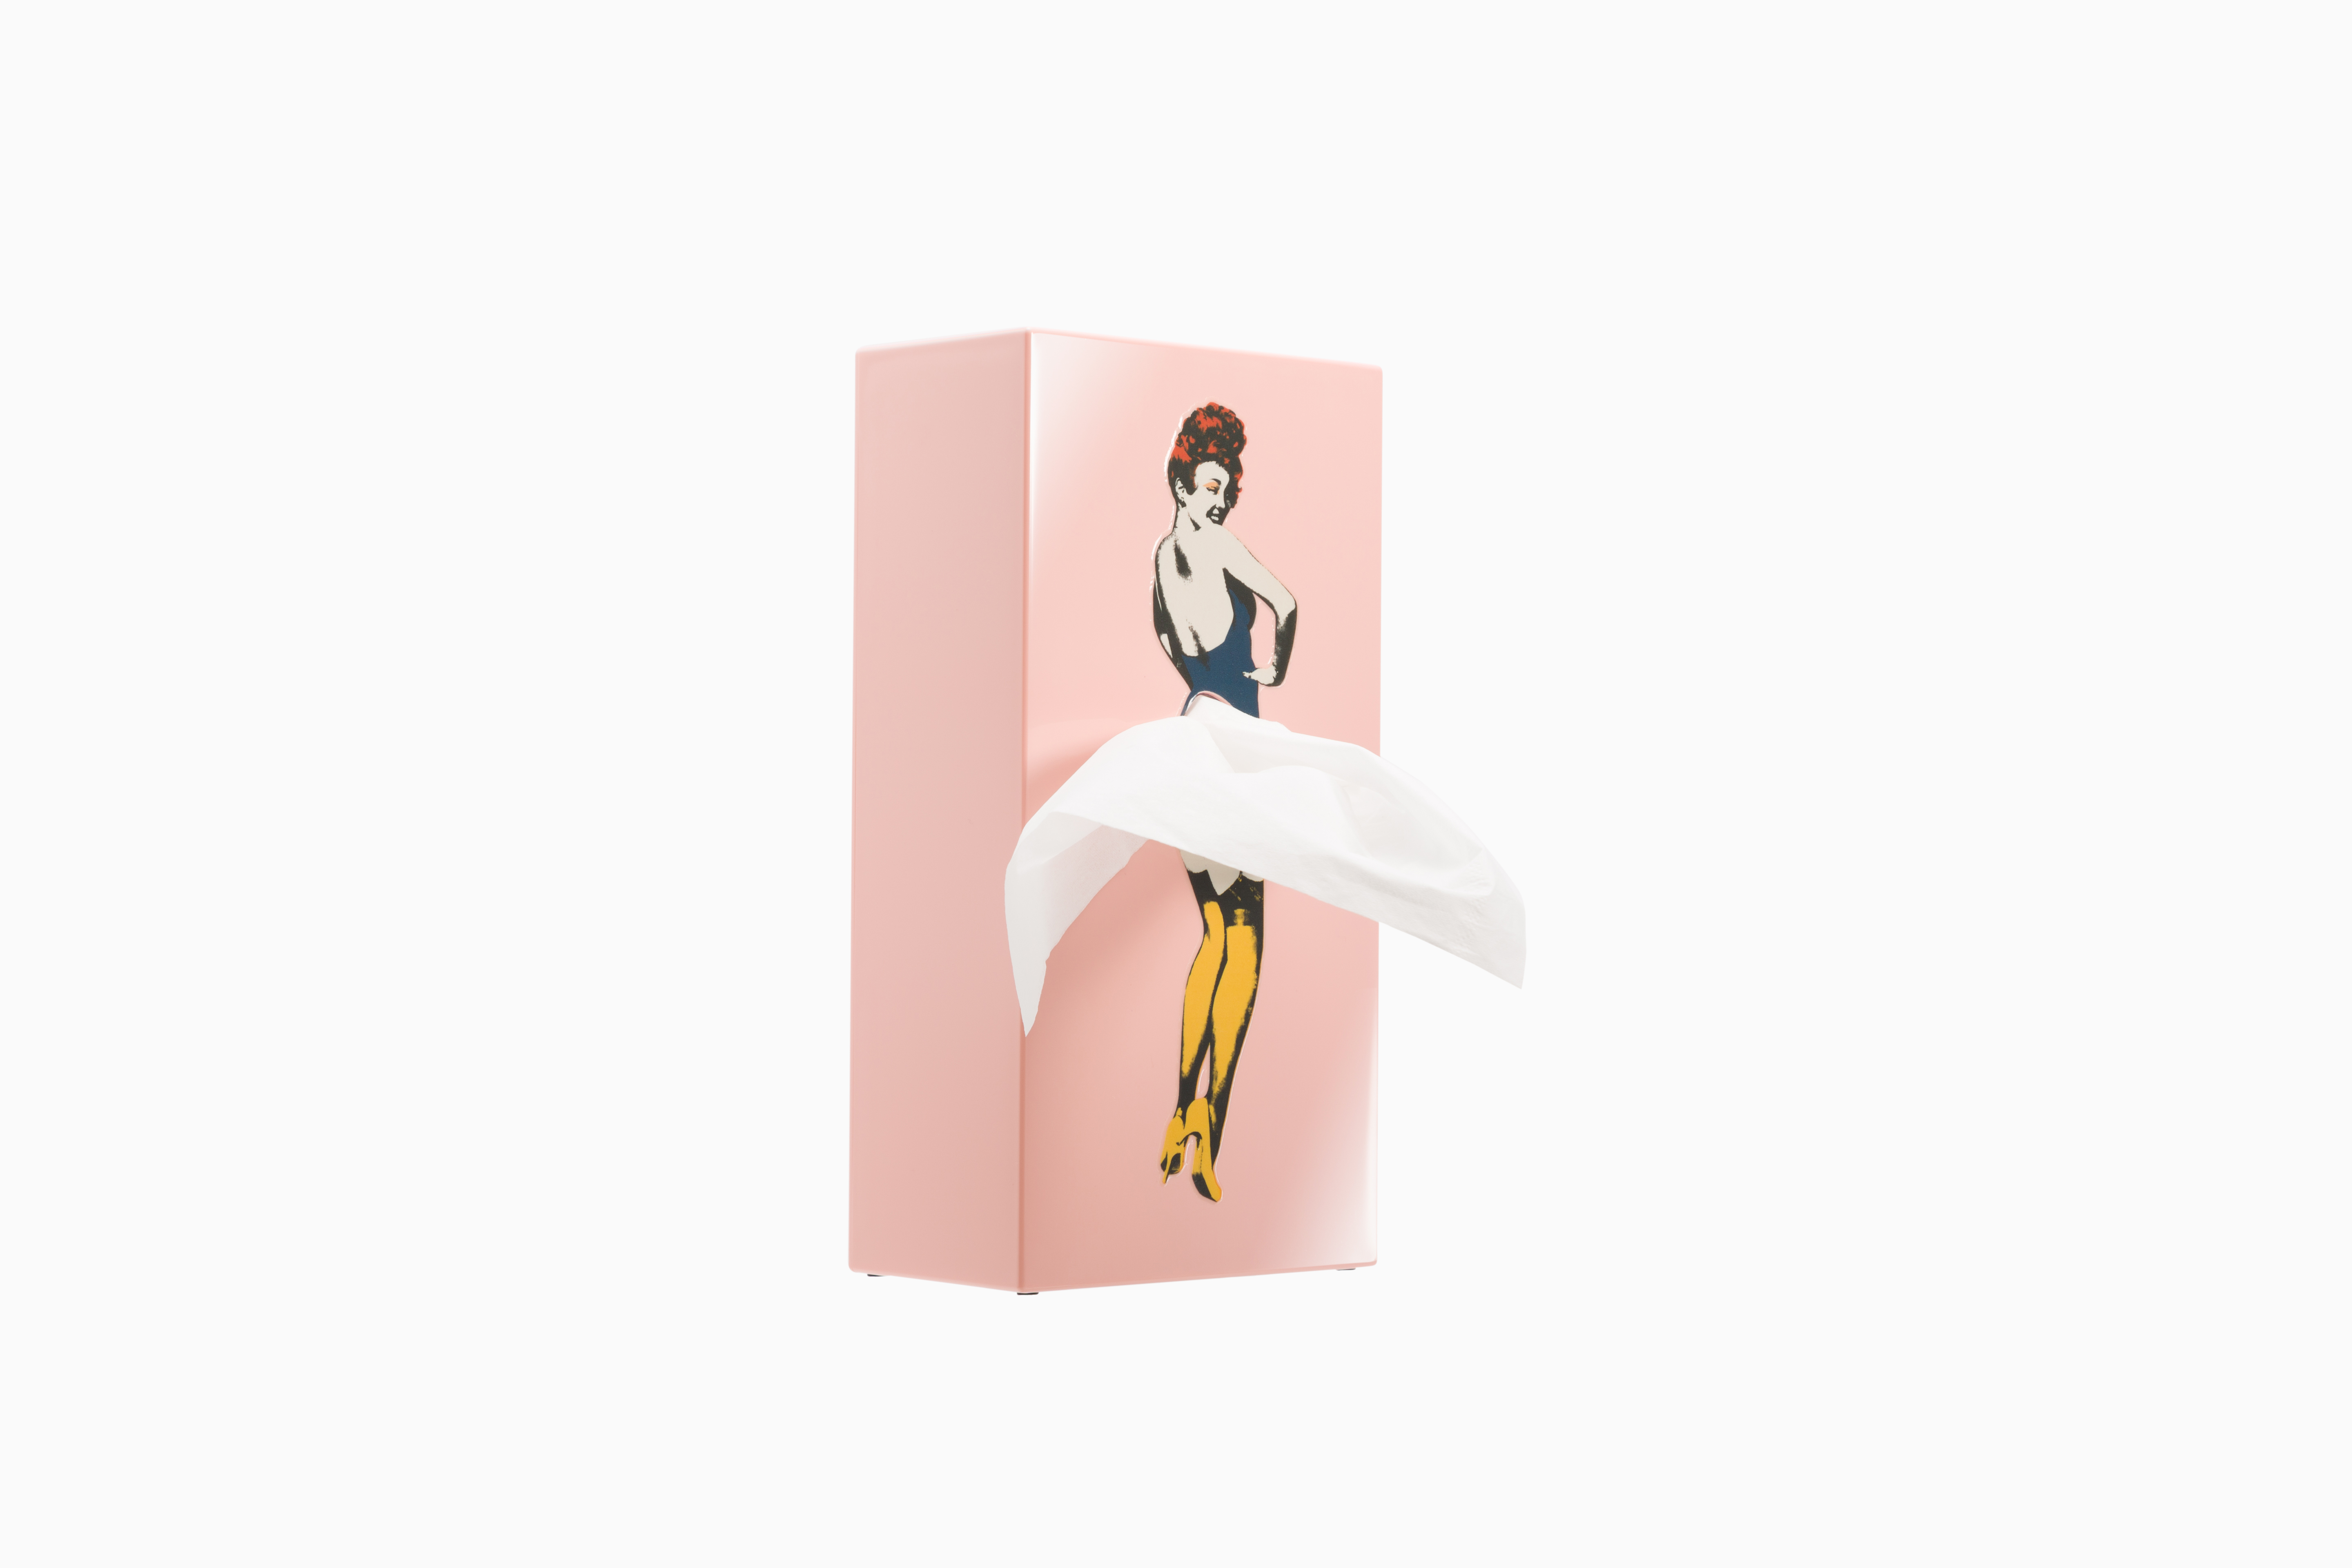 Fun in norm life Tissue up girl gives pleasant in your daily norm life while taking out the tissue o...